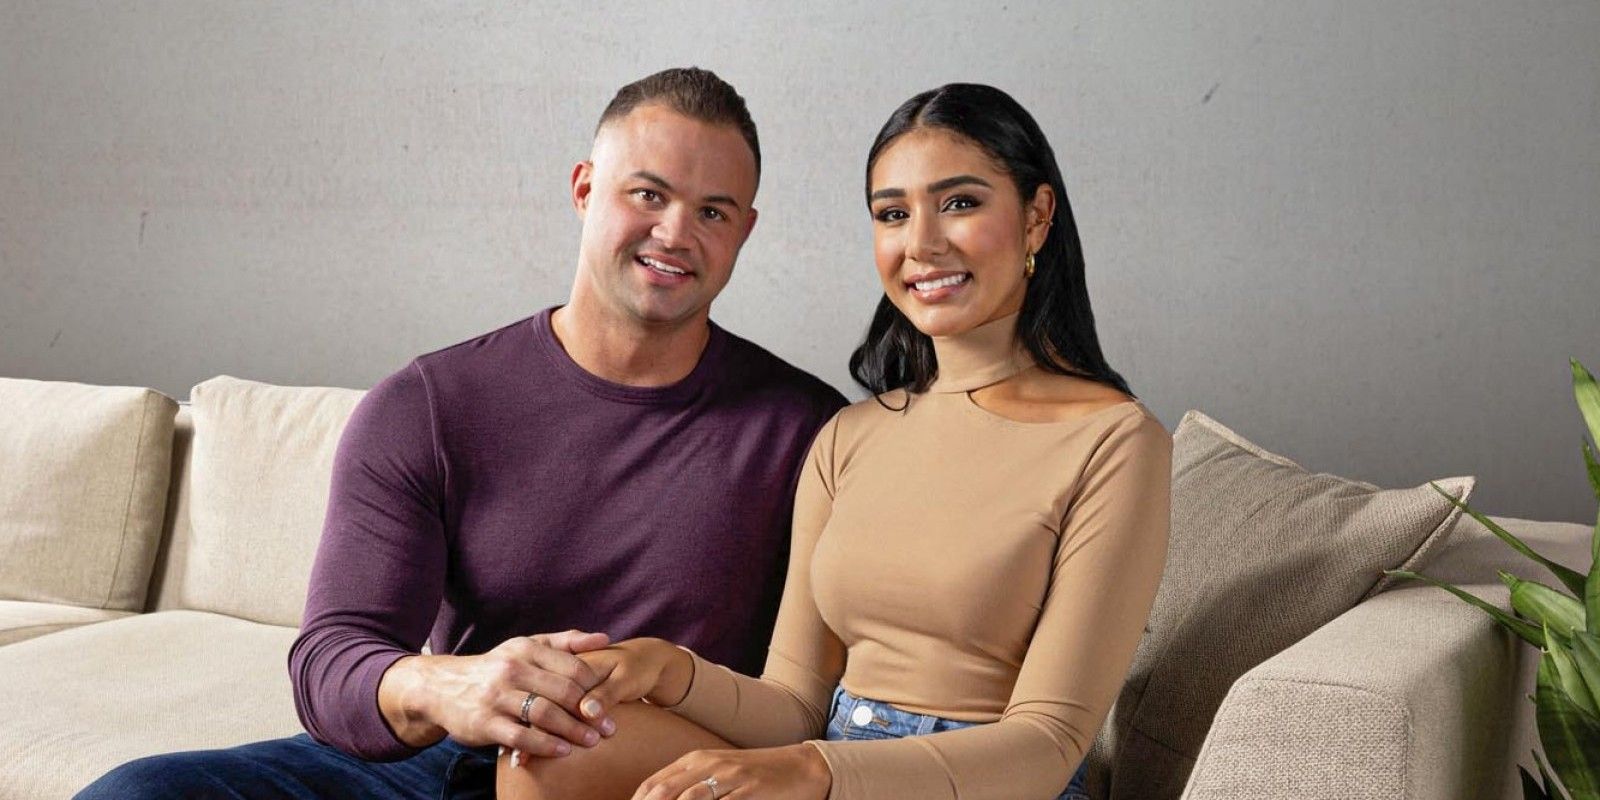 Patrick Mendes and Thaís Ramone from 90 Day Fiancé season 9 smiling